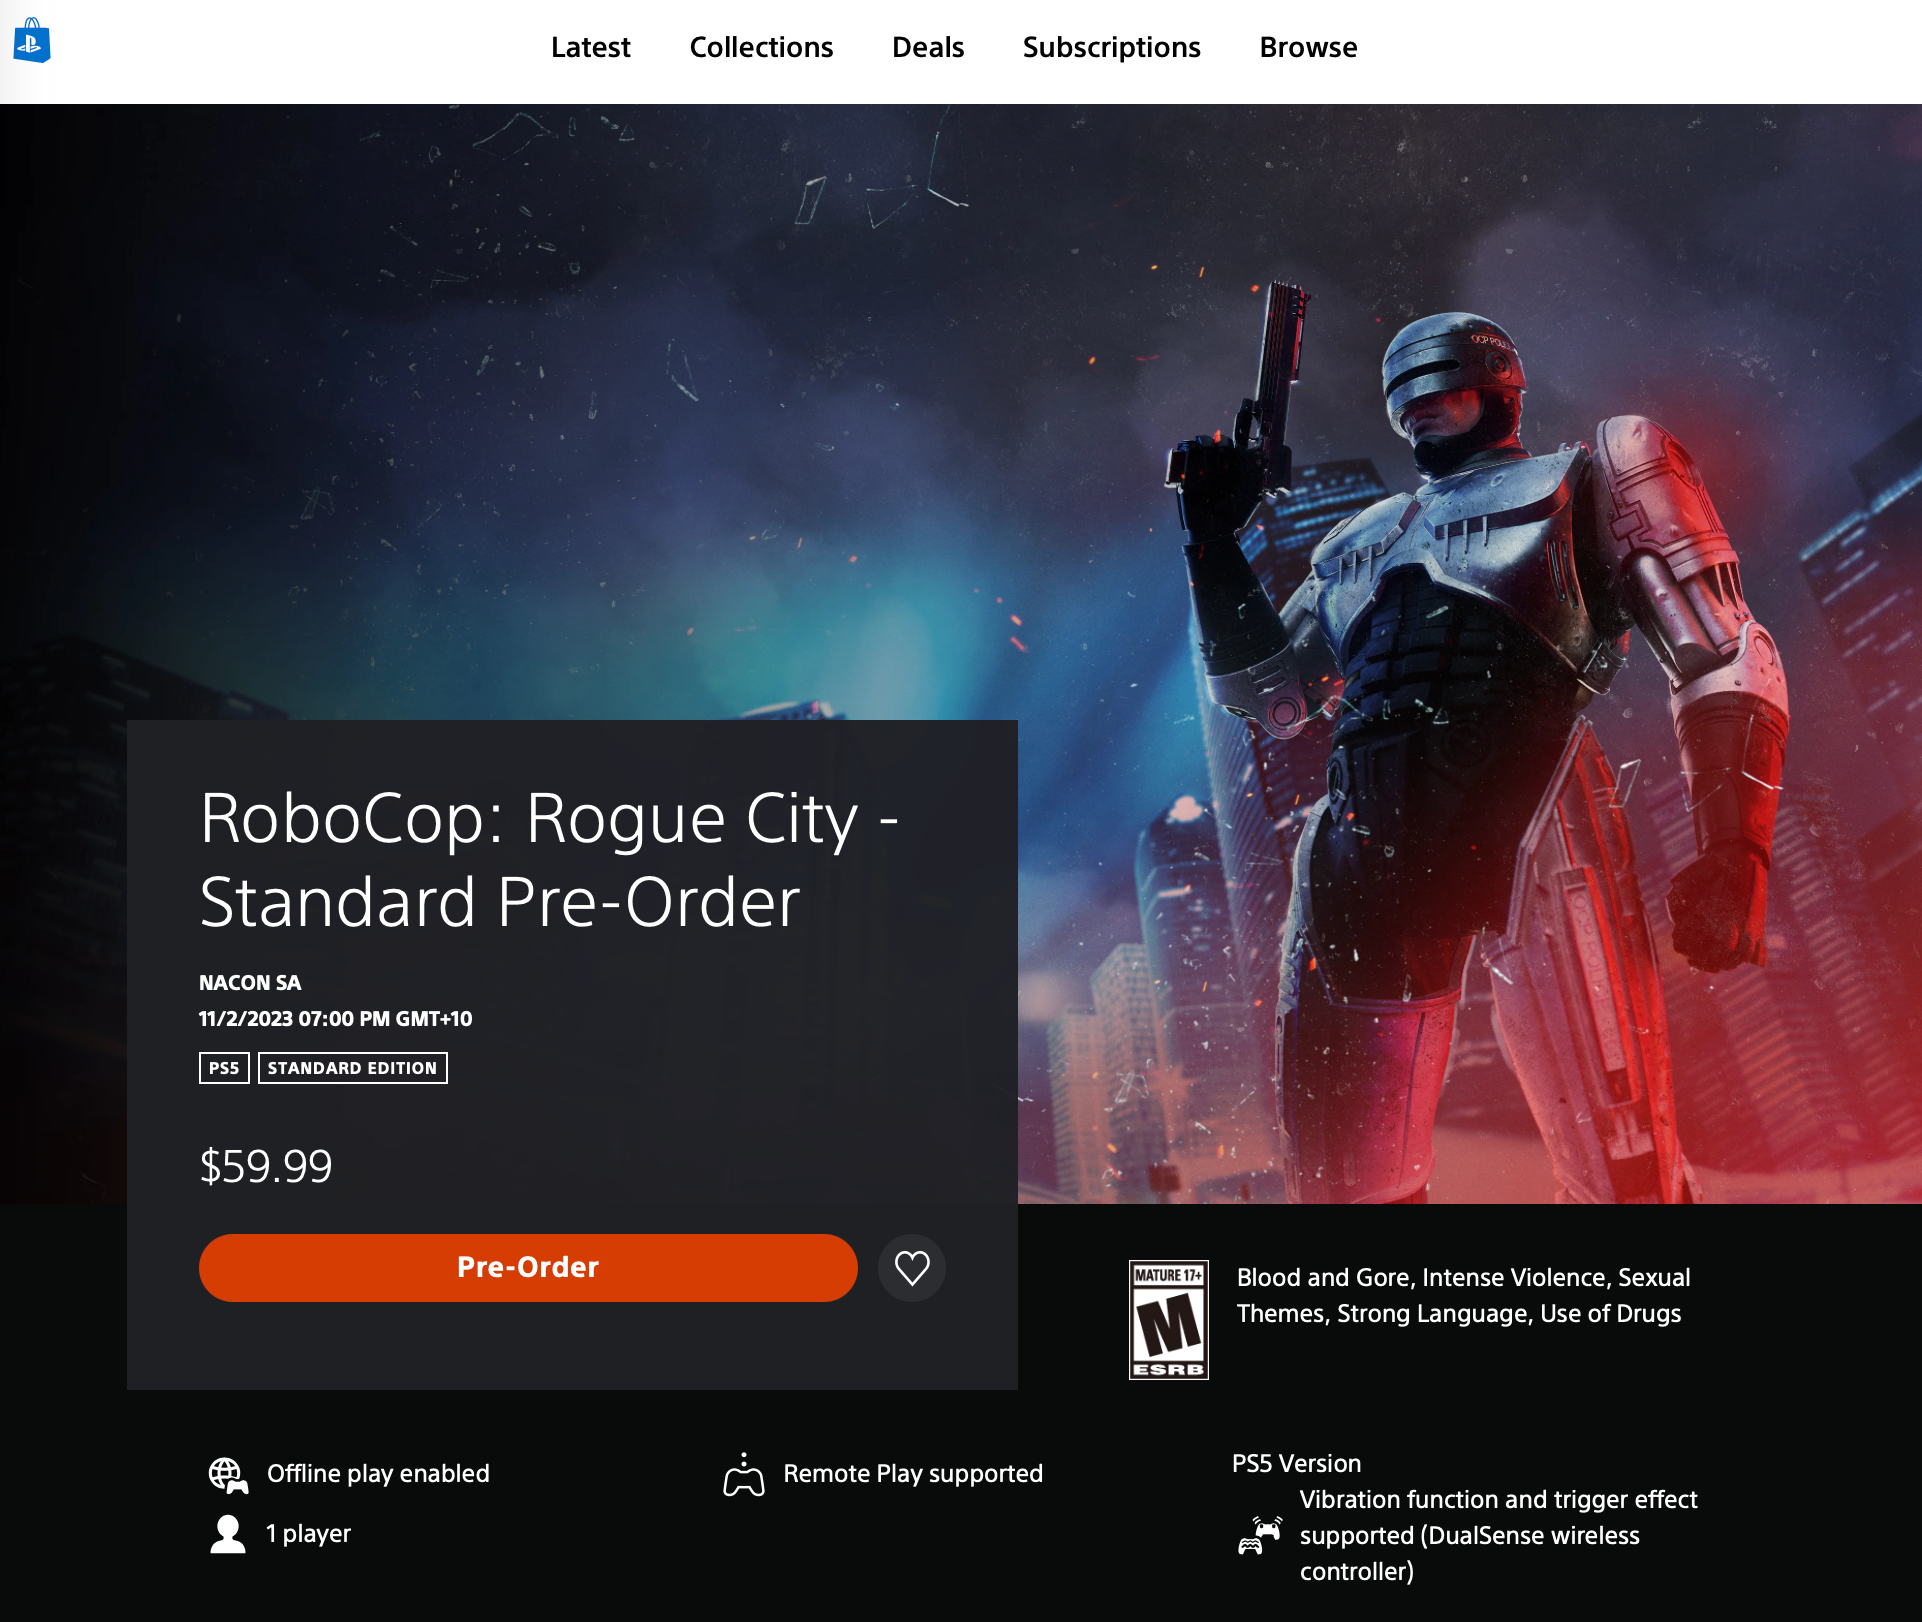 The preorder page for Robocop: Rogue City on PlayStation 5